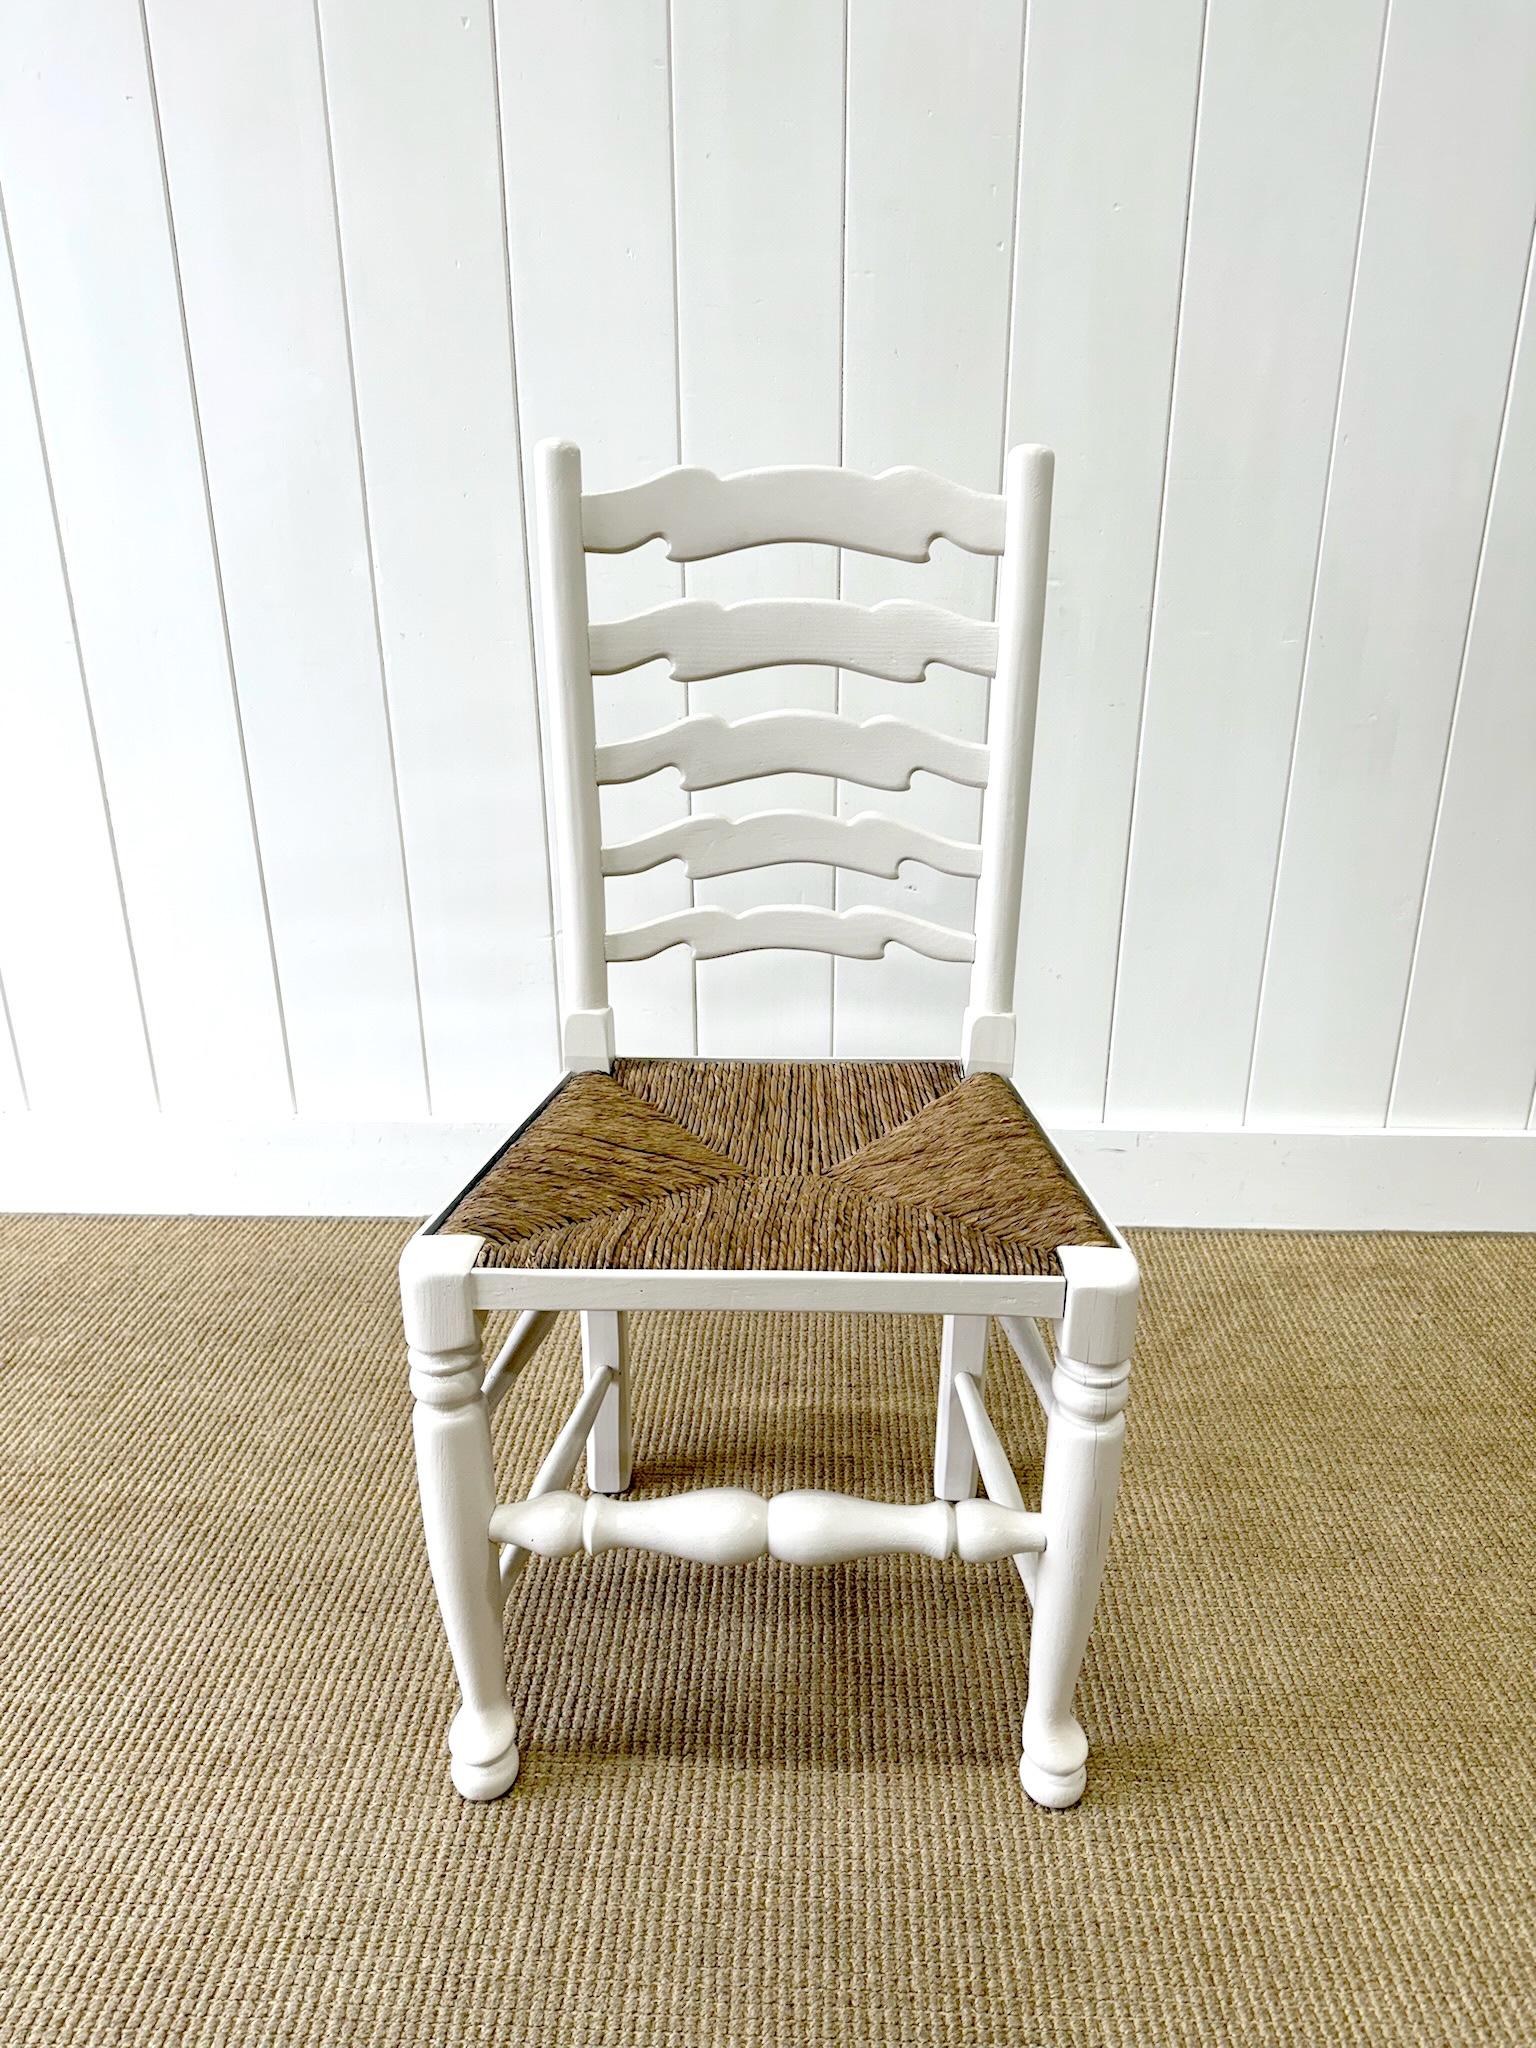 20th Century A Set of 4 Ladderback Rush Seat Chairs Painted White For Sale